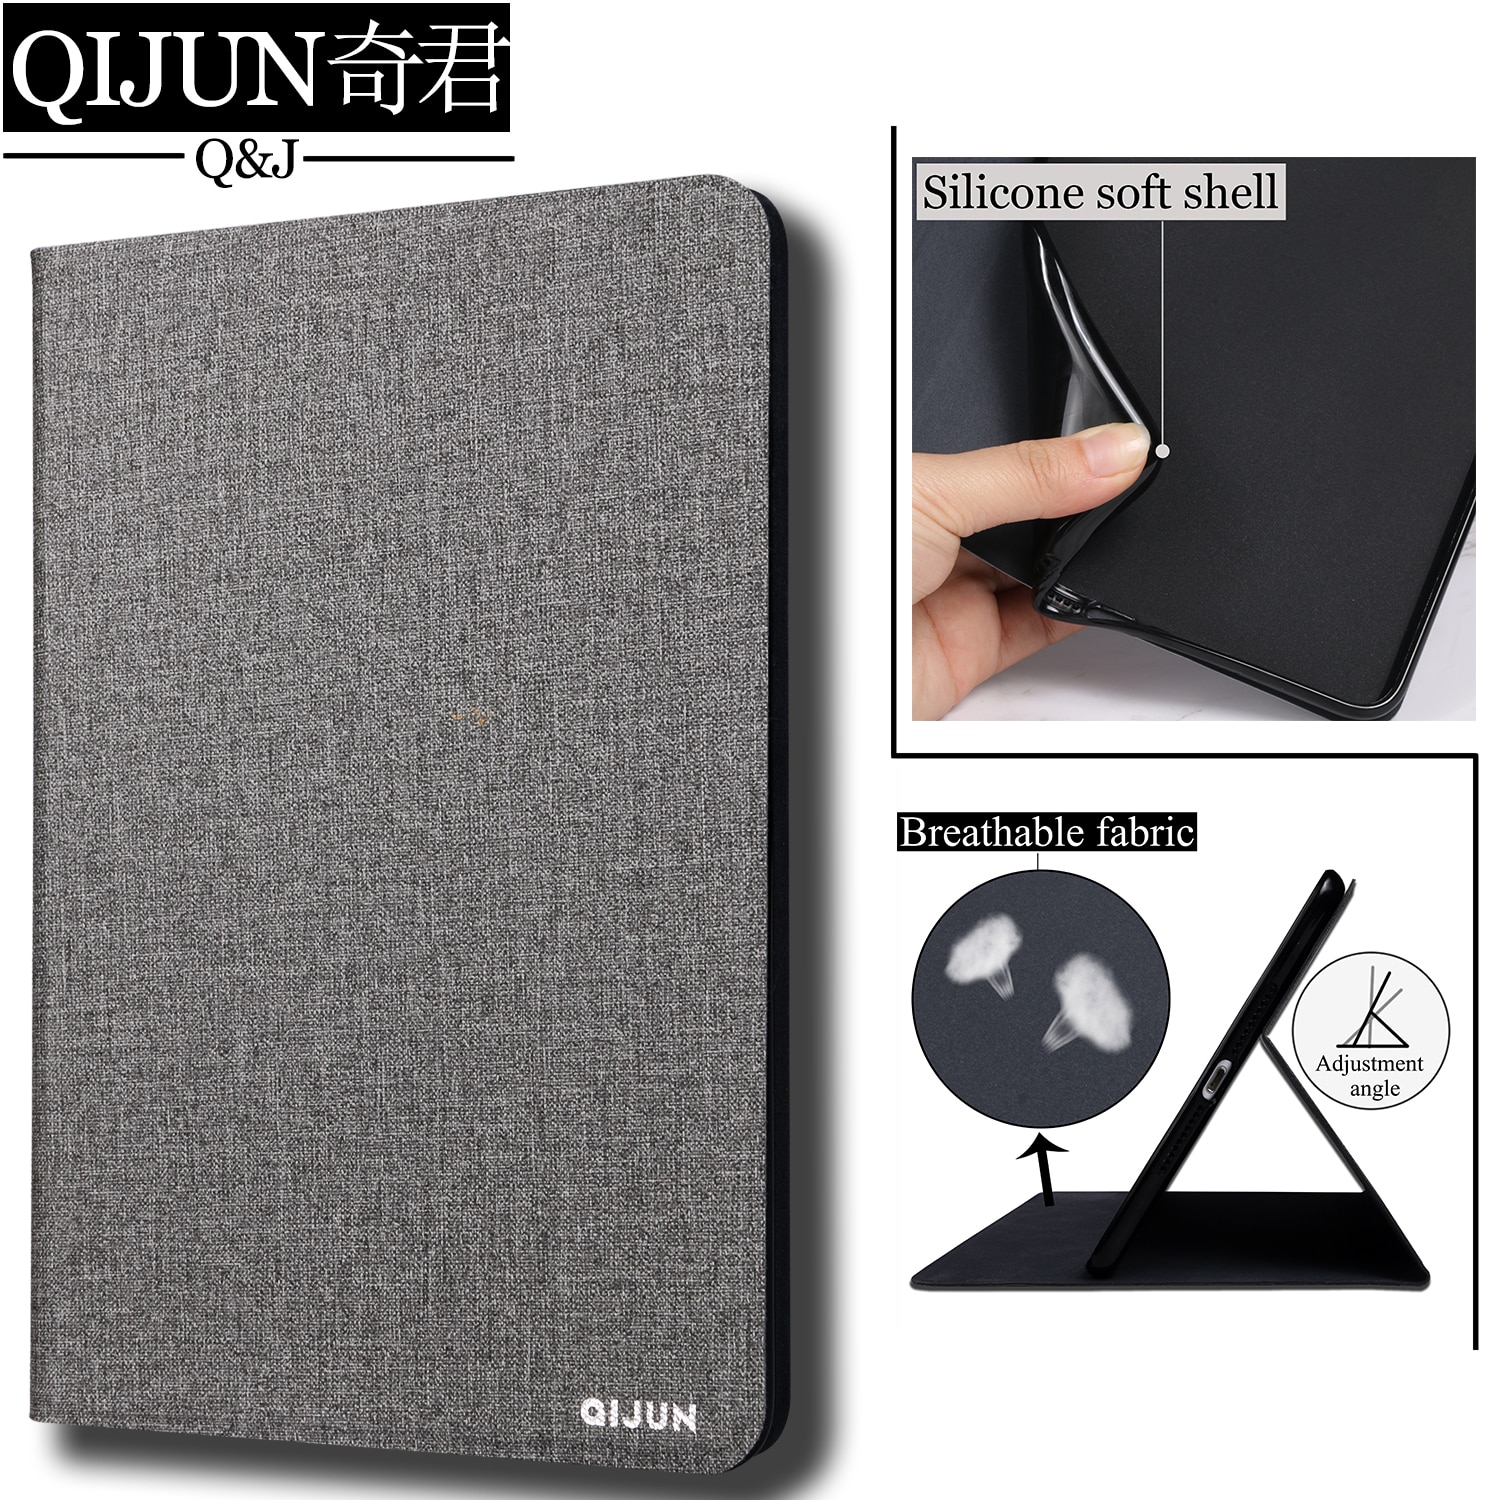 Tablet Flip Case Voor Samsung Galaxy Tab S6 10.5 Beschermende Stand Cover Silicone Soft Shell Fundas Capa Voor SM-T860/T865